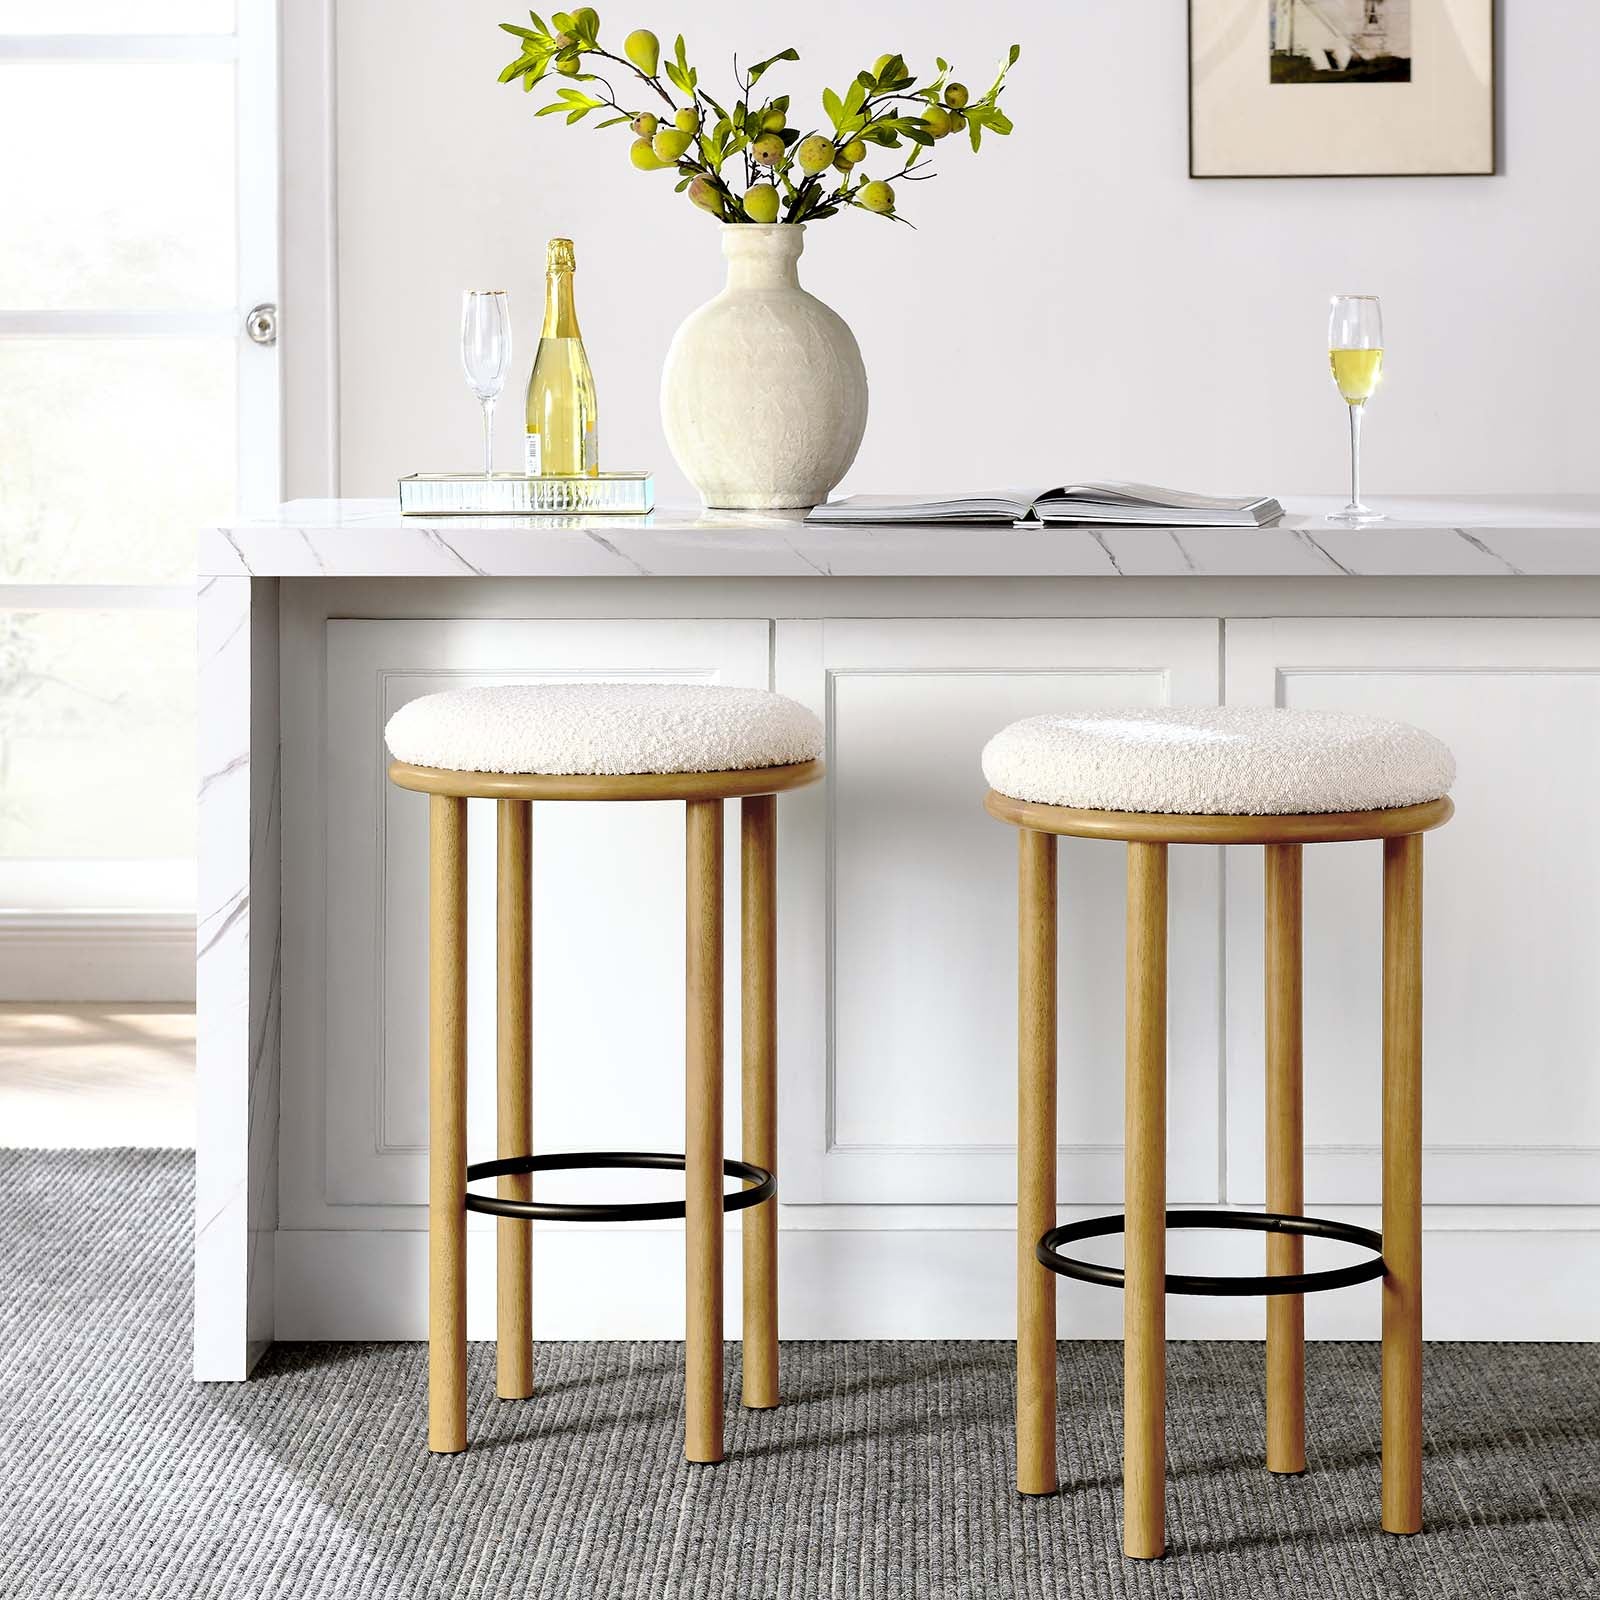 Fable Boucle Fabric Bar Stools - Set of 2